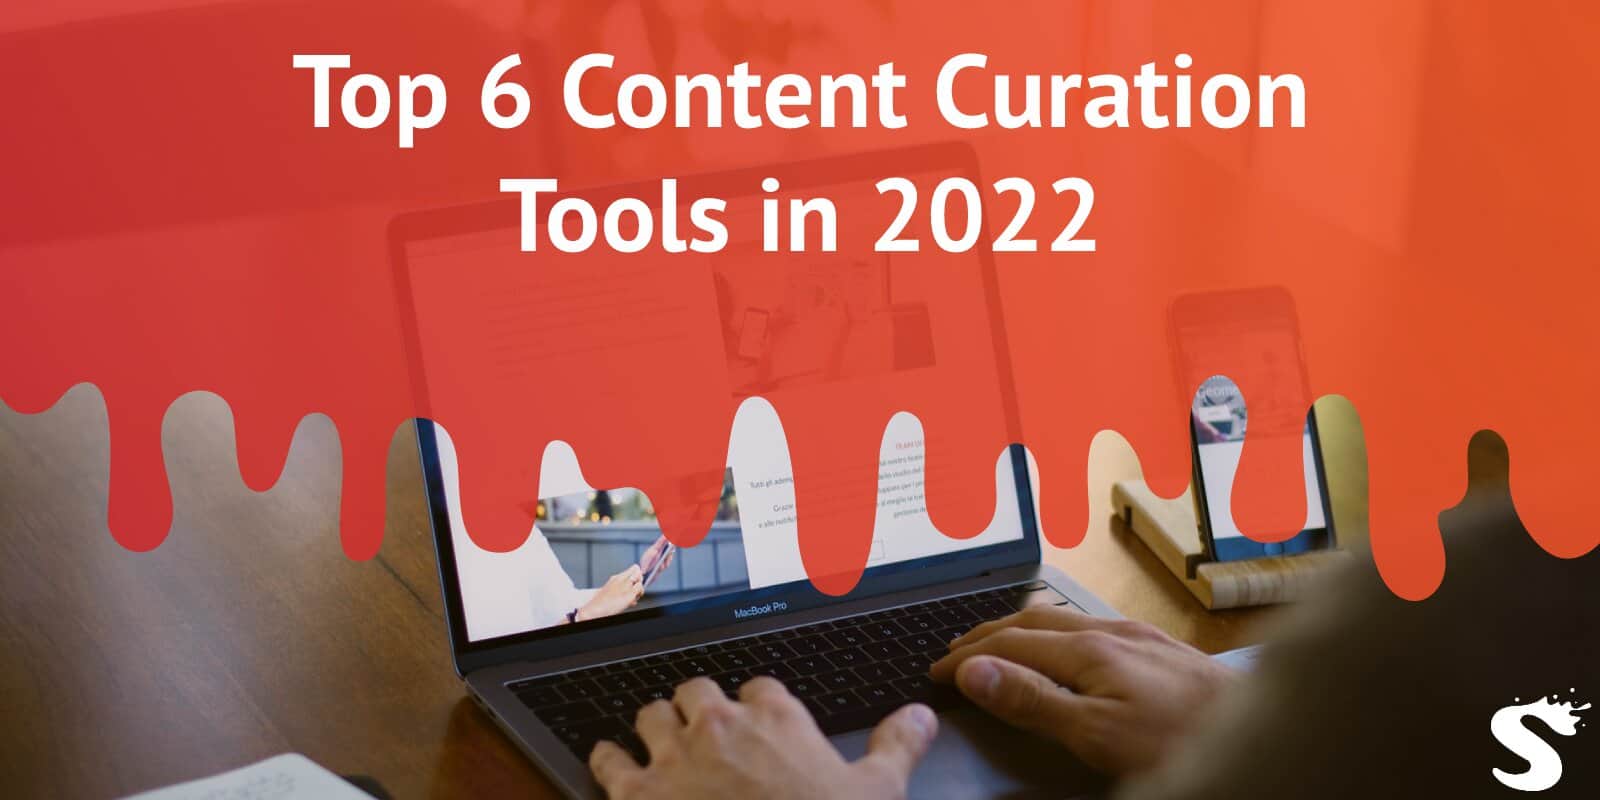 Top 6 Content Curation Tools in 2022